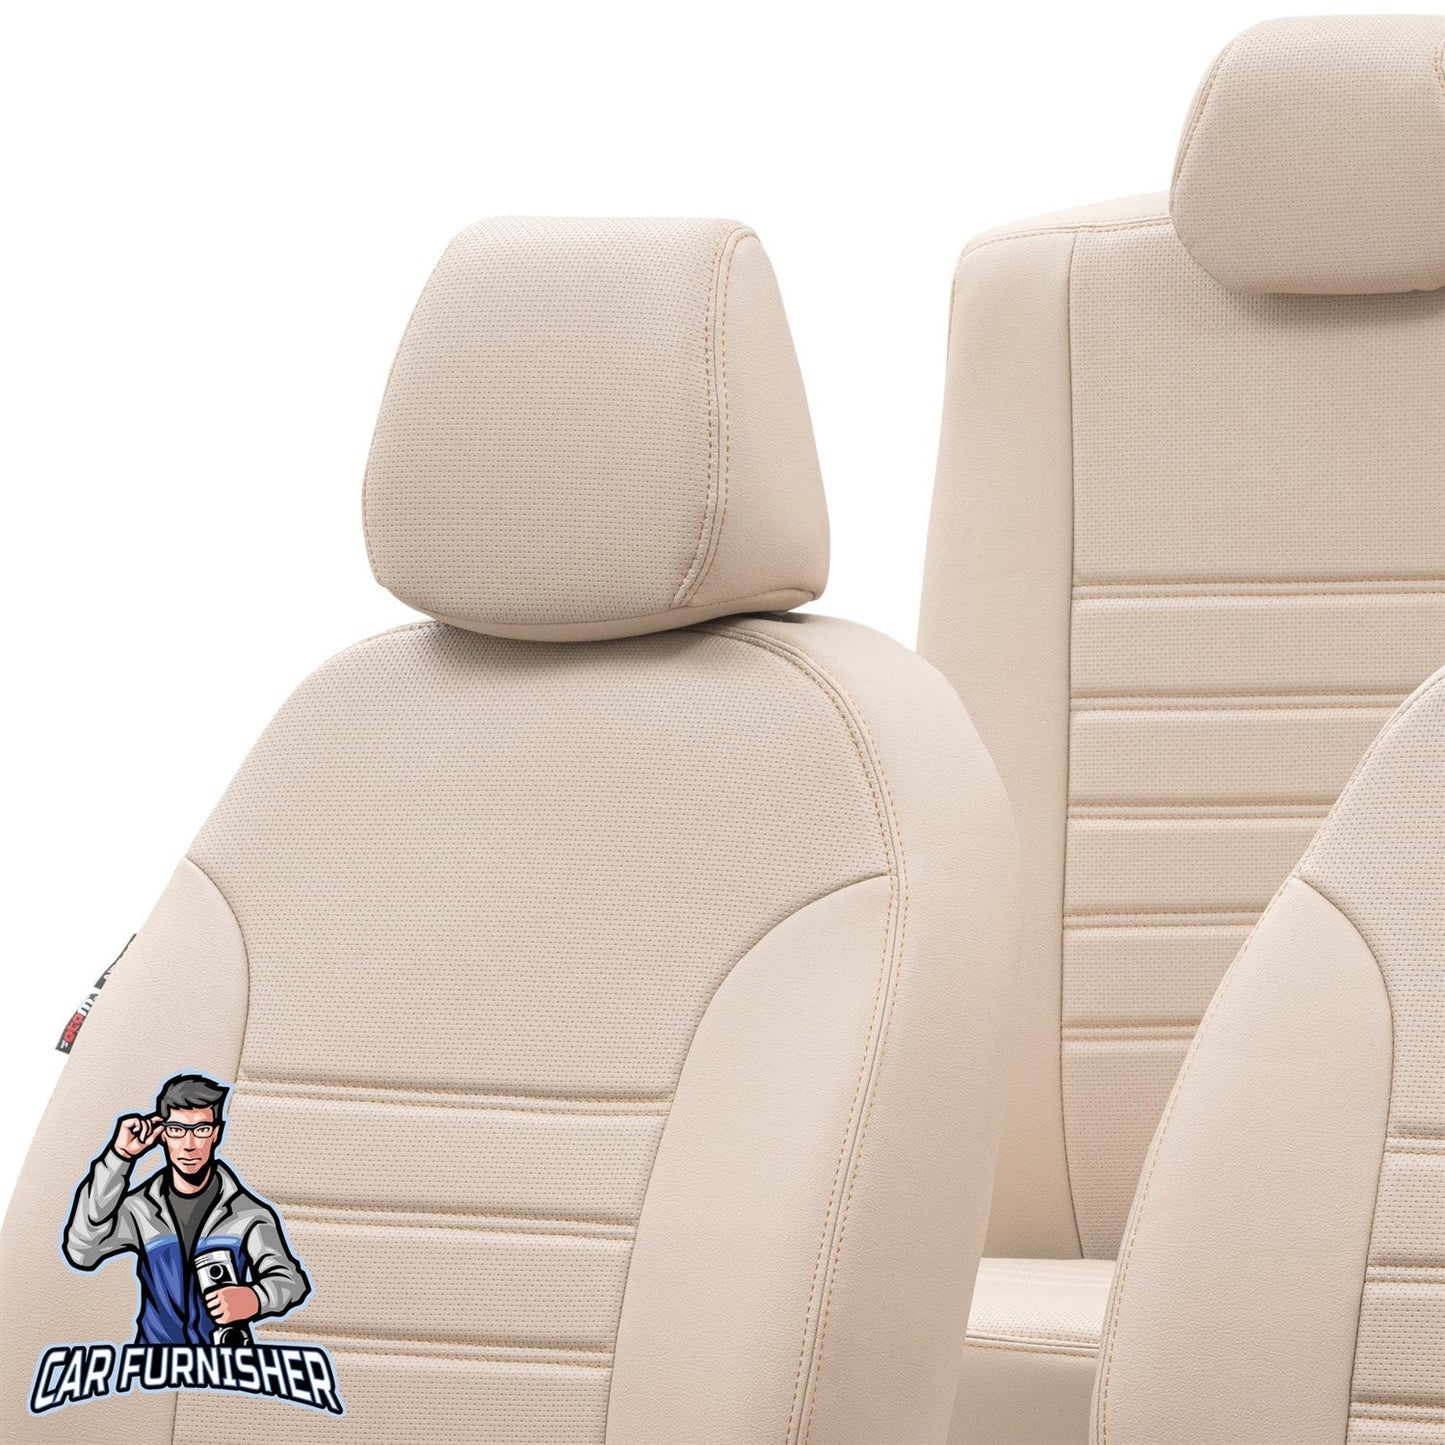 Volkswagen Transporter Seat Cover New York Leather Design Ivory Leather